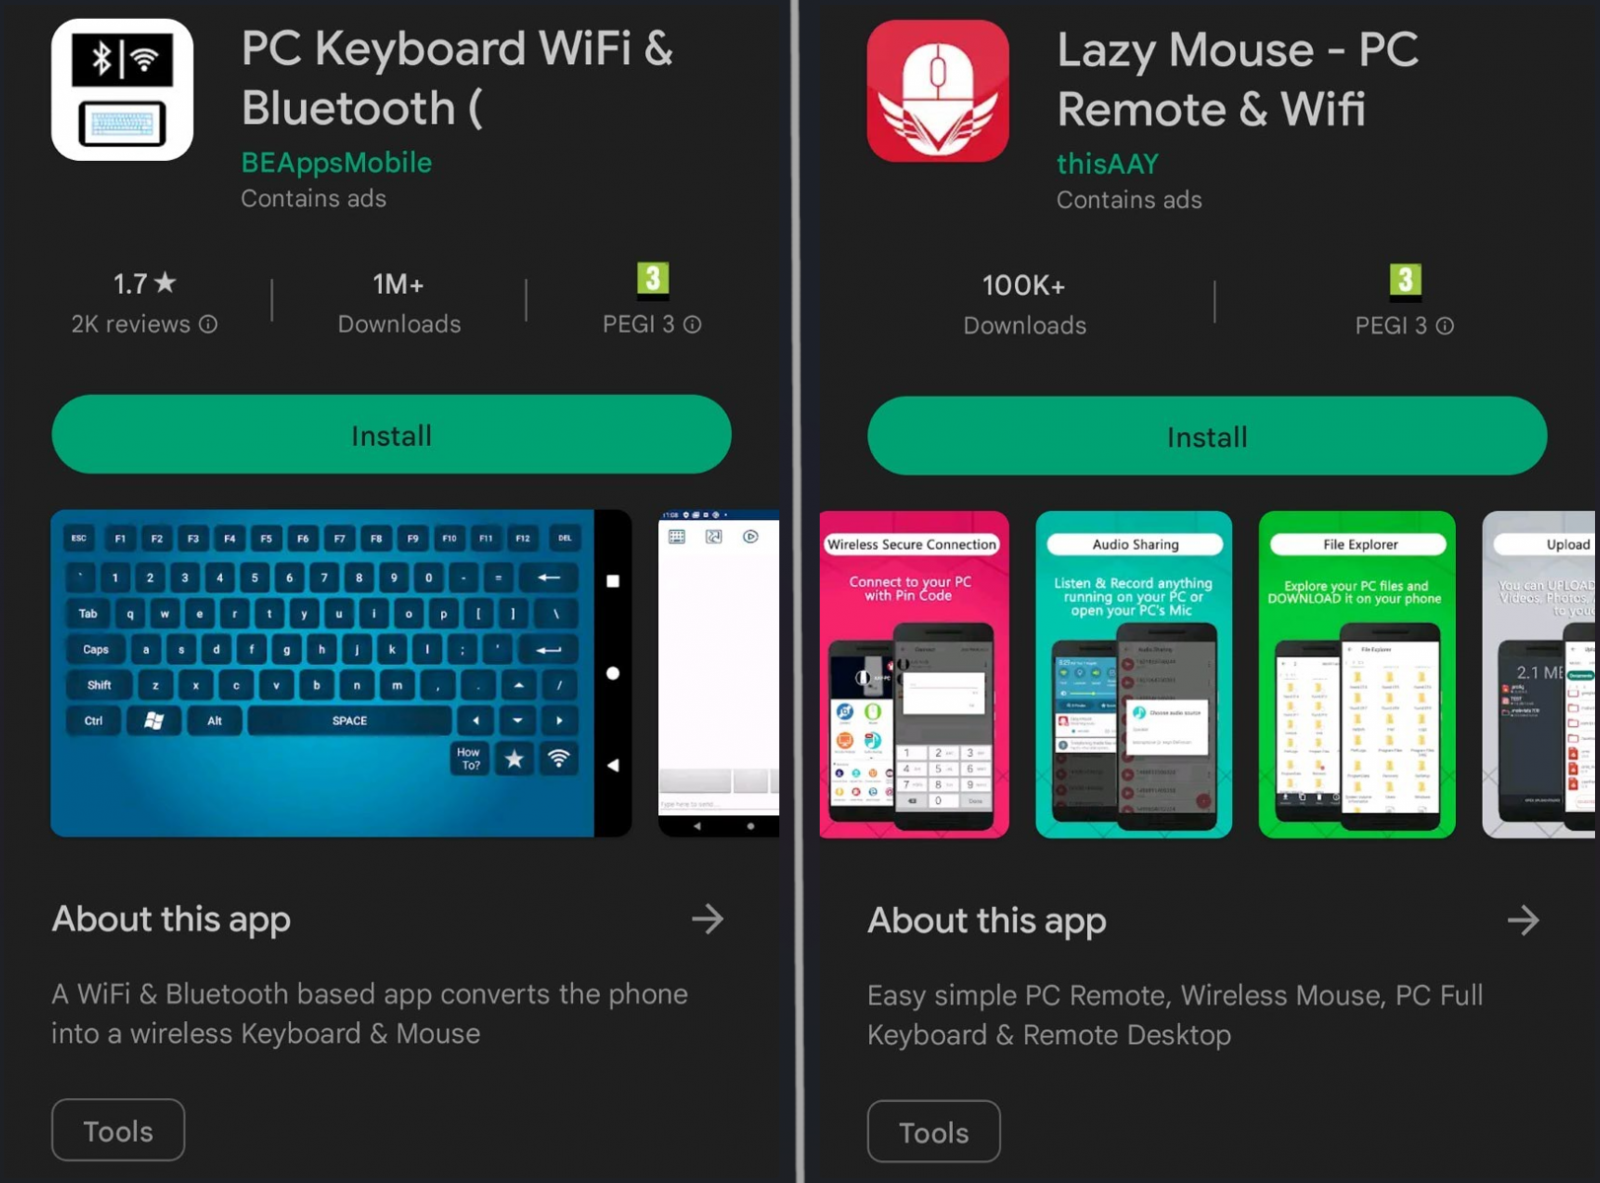 PC Keyboard and Lazy Mouse are still available on Google Play